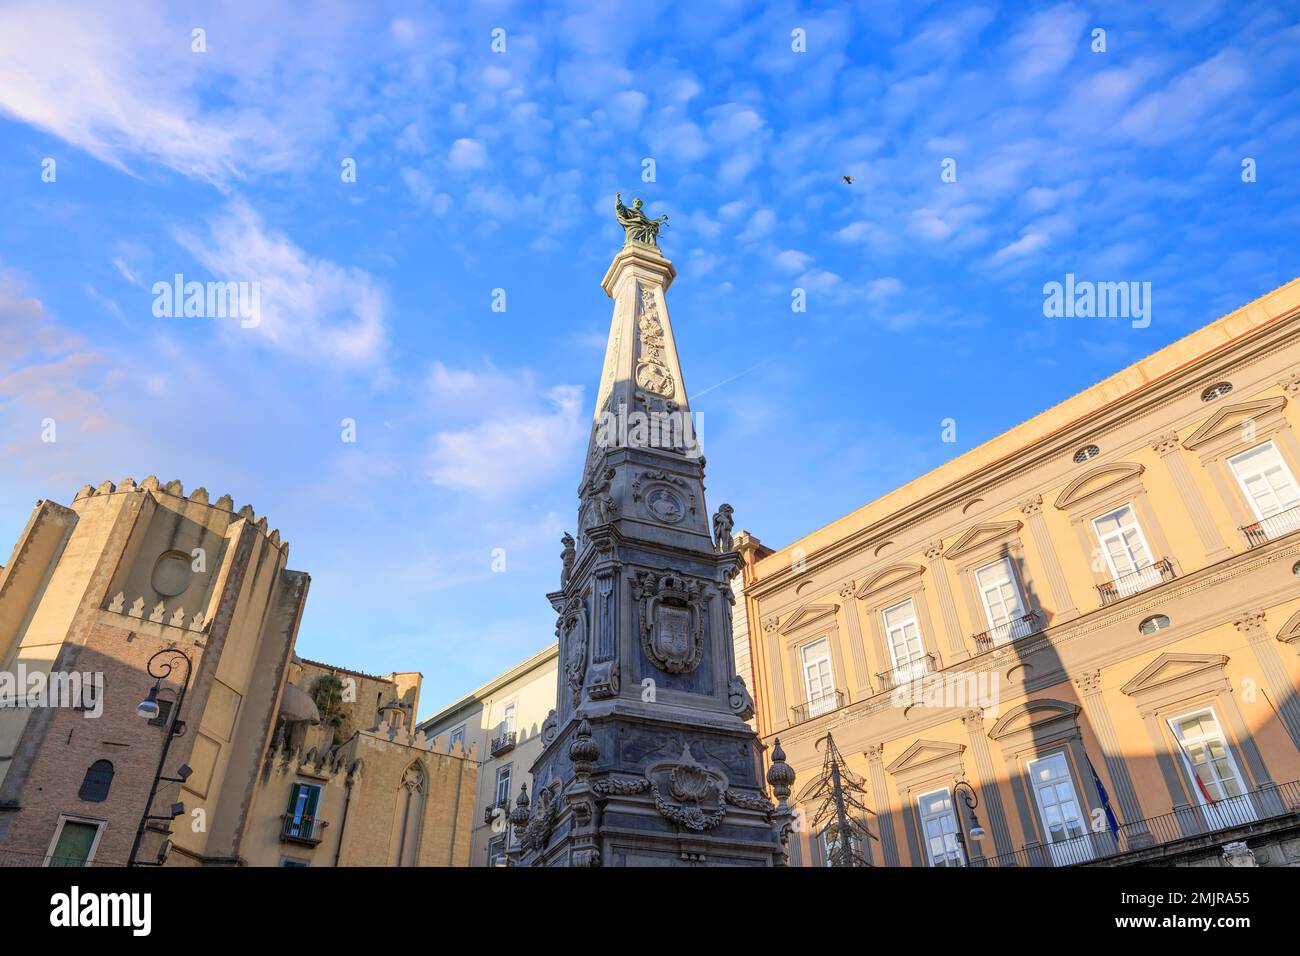 View of the Piazza San Domenico Maggiore, one of the most important squares in the historical center of Naples. Stock Photo